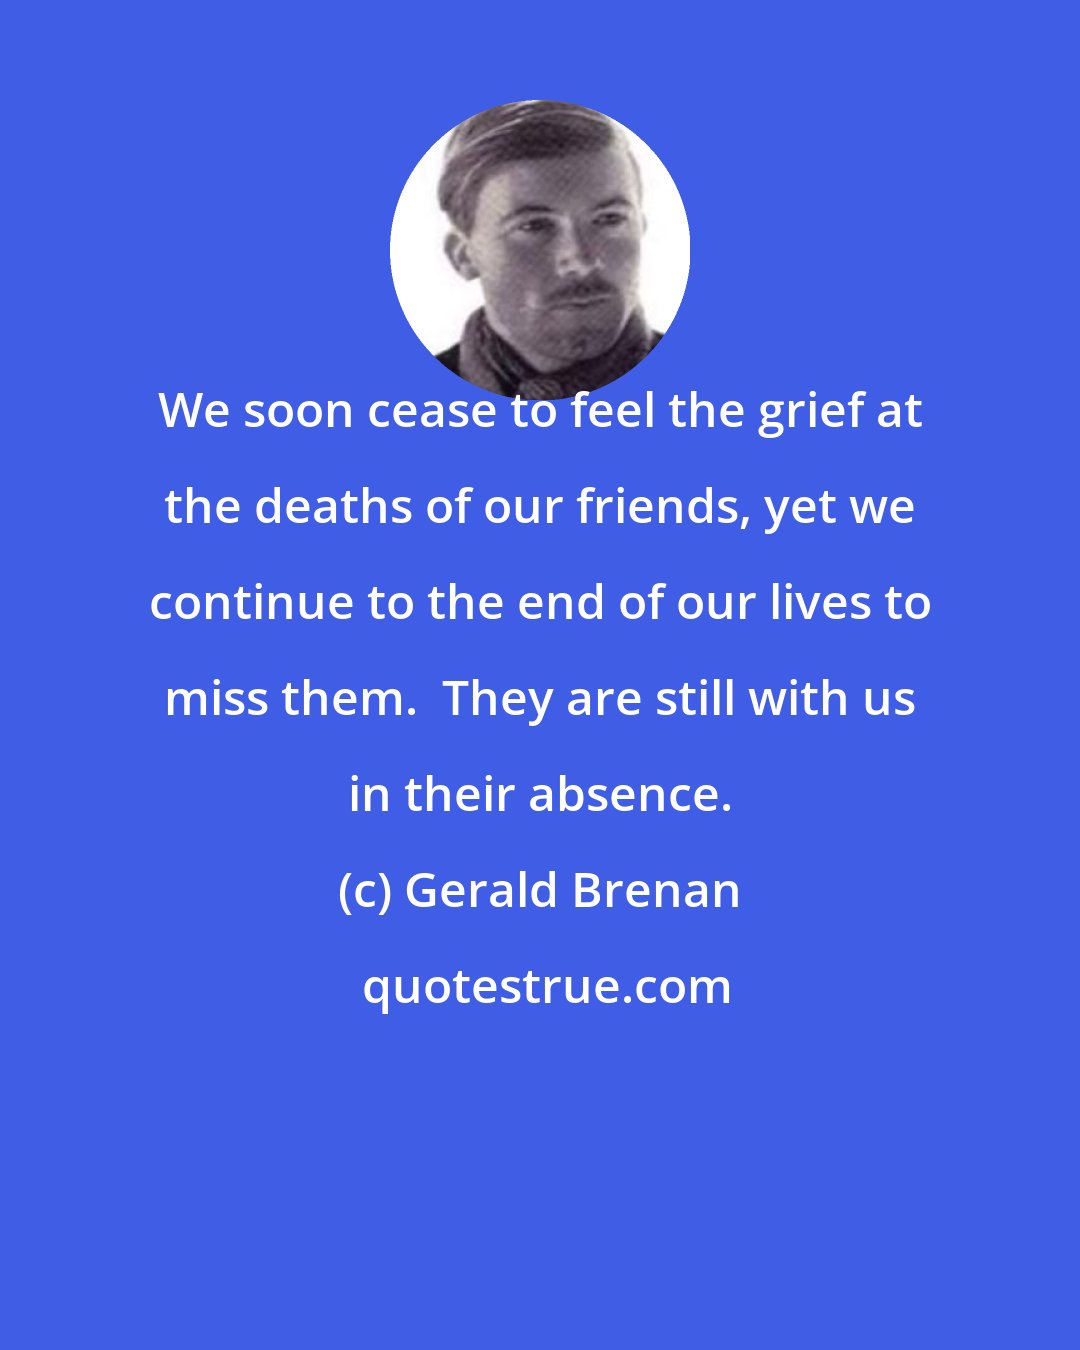 Gerald Brenan: We soon cease to feel the grief at the deaths of our friends, yet we continue to the end of our lives to miss them.  They are still with us in their absence.